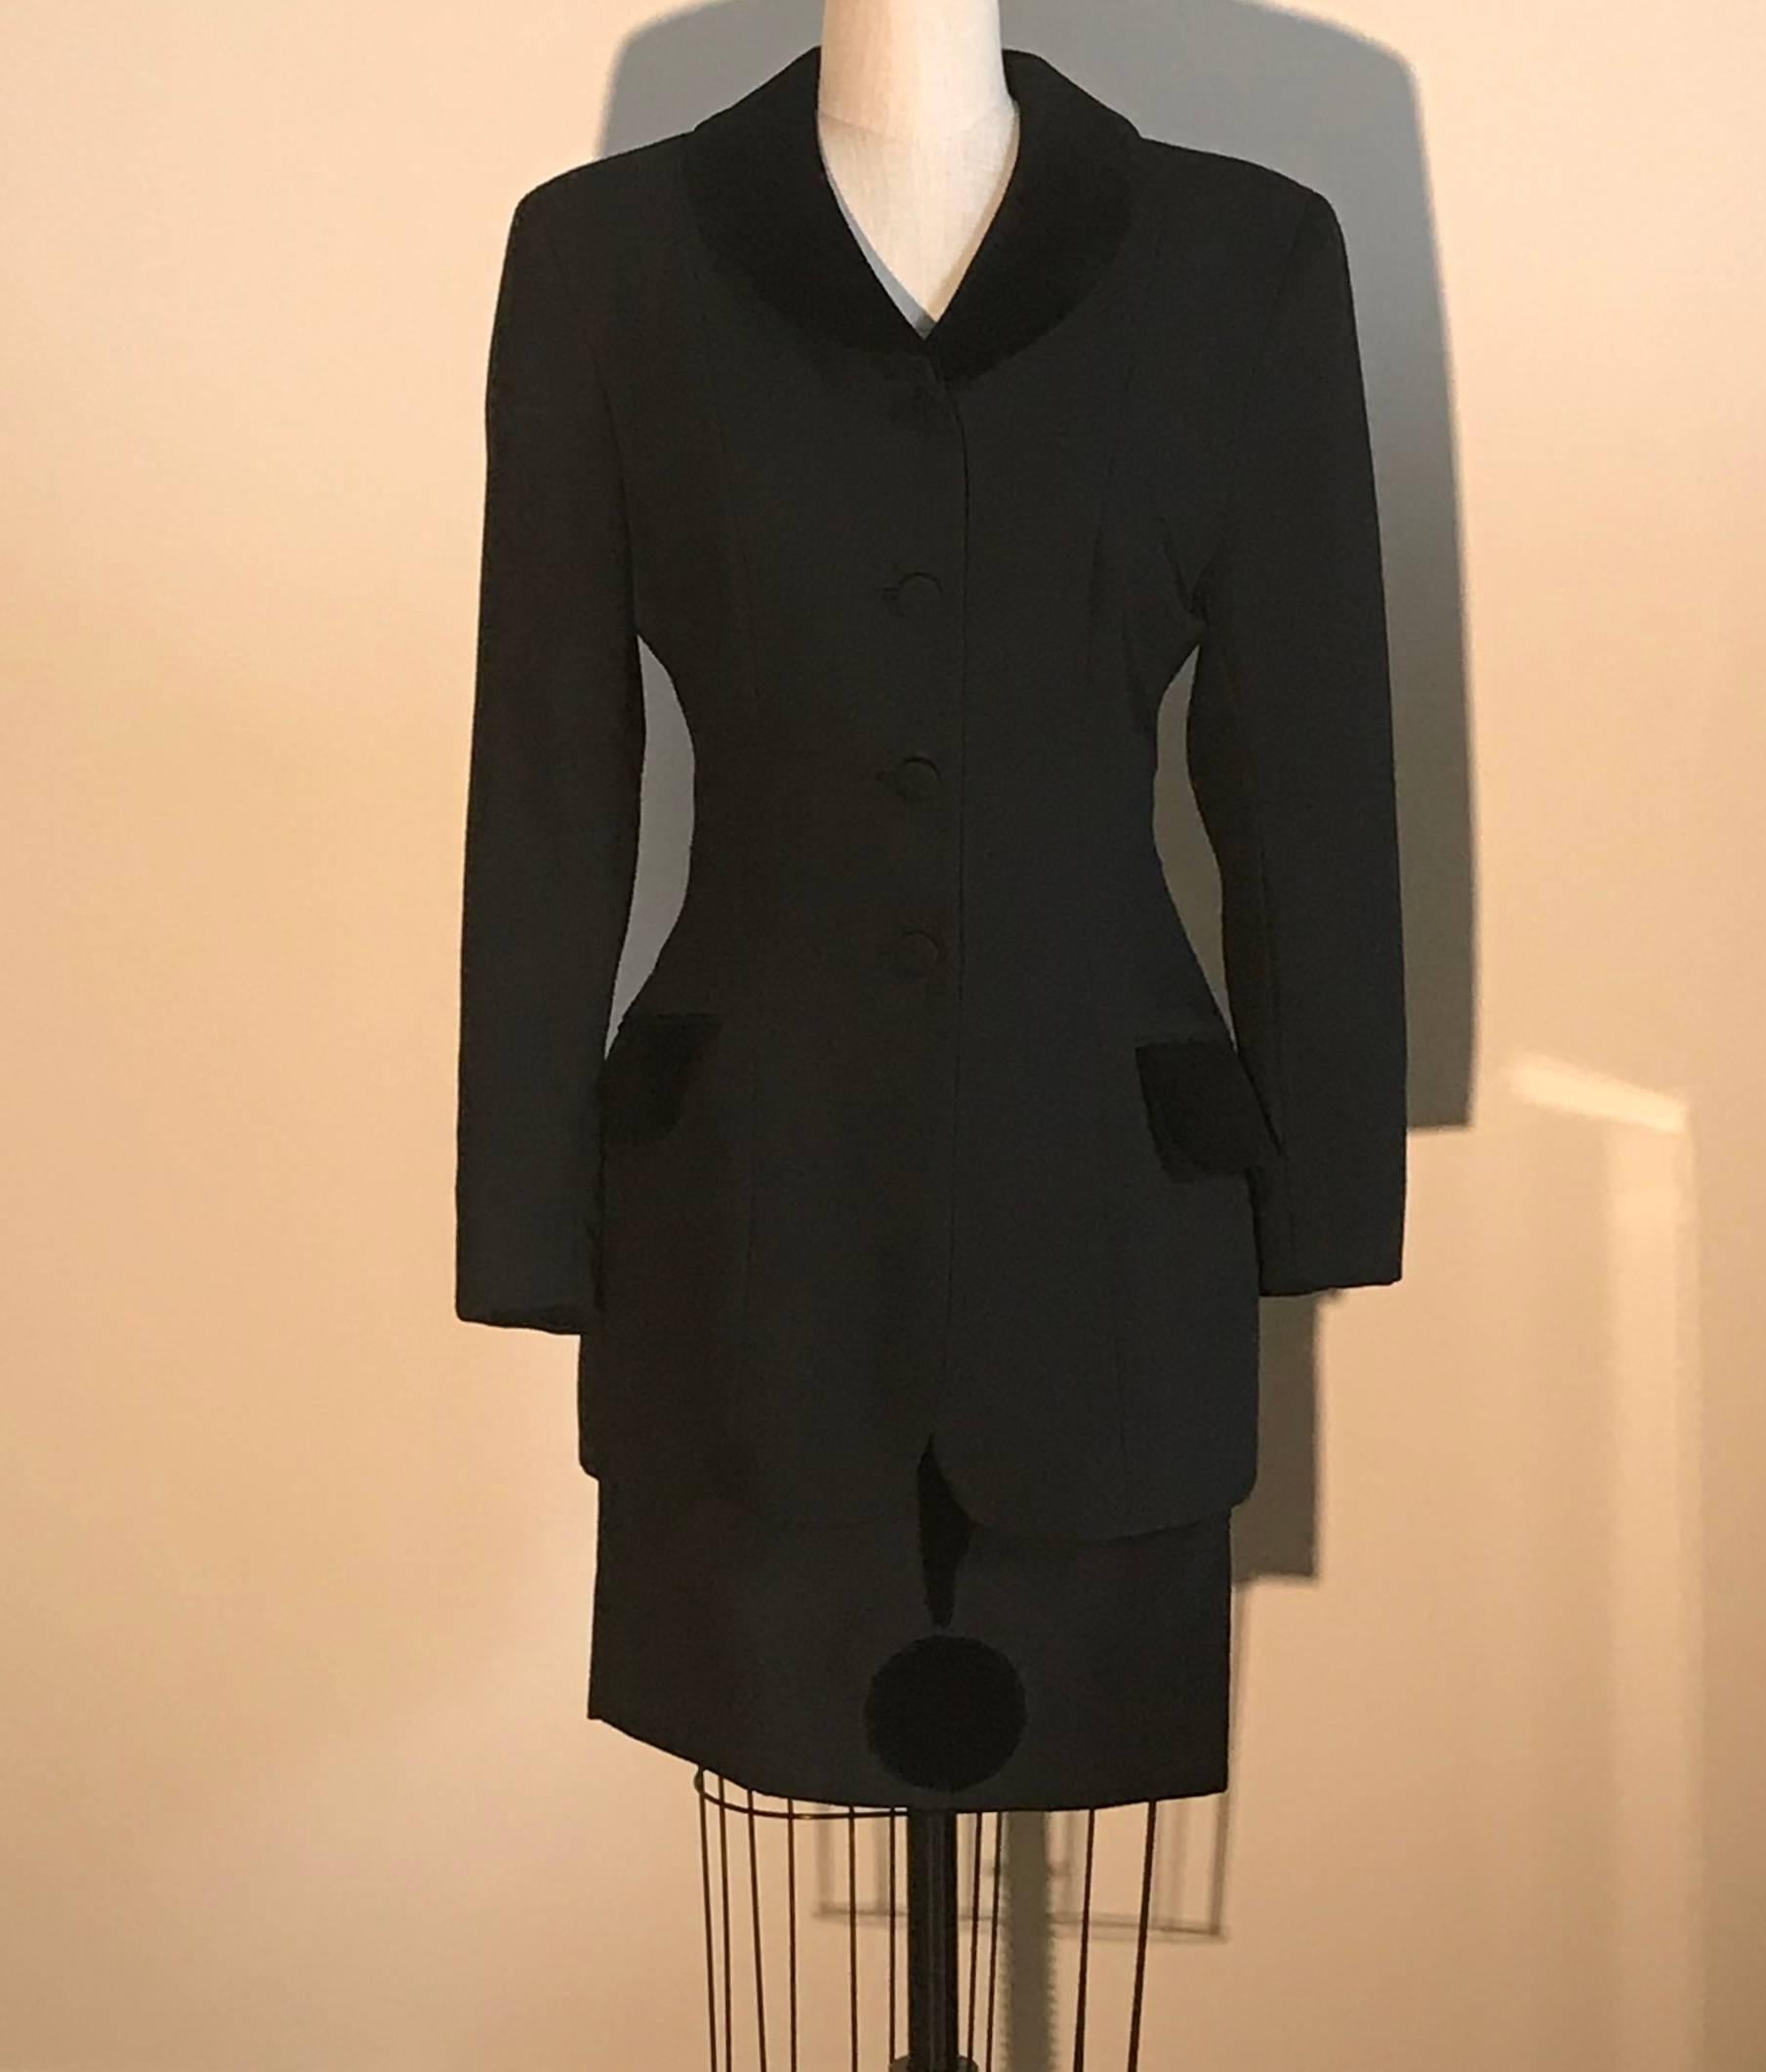 Moschino Cheap and Chic vintage 1990s black suit with velvet accents. Jacket features velvet collar and pockets, while skirt features a question mark that wraps around the skirt. Velvet loop at bottom of collar, possibly for holding a scarf. Jacket